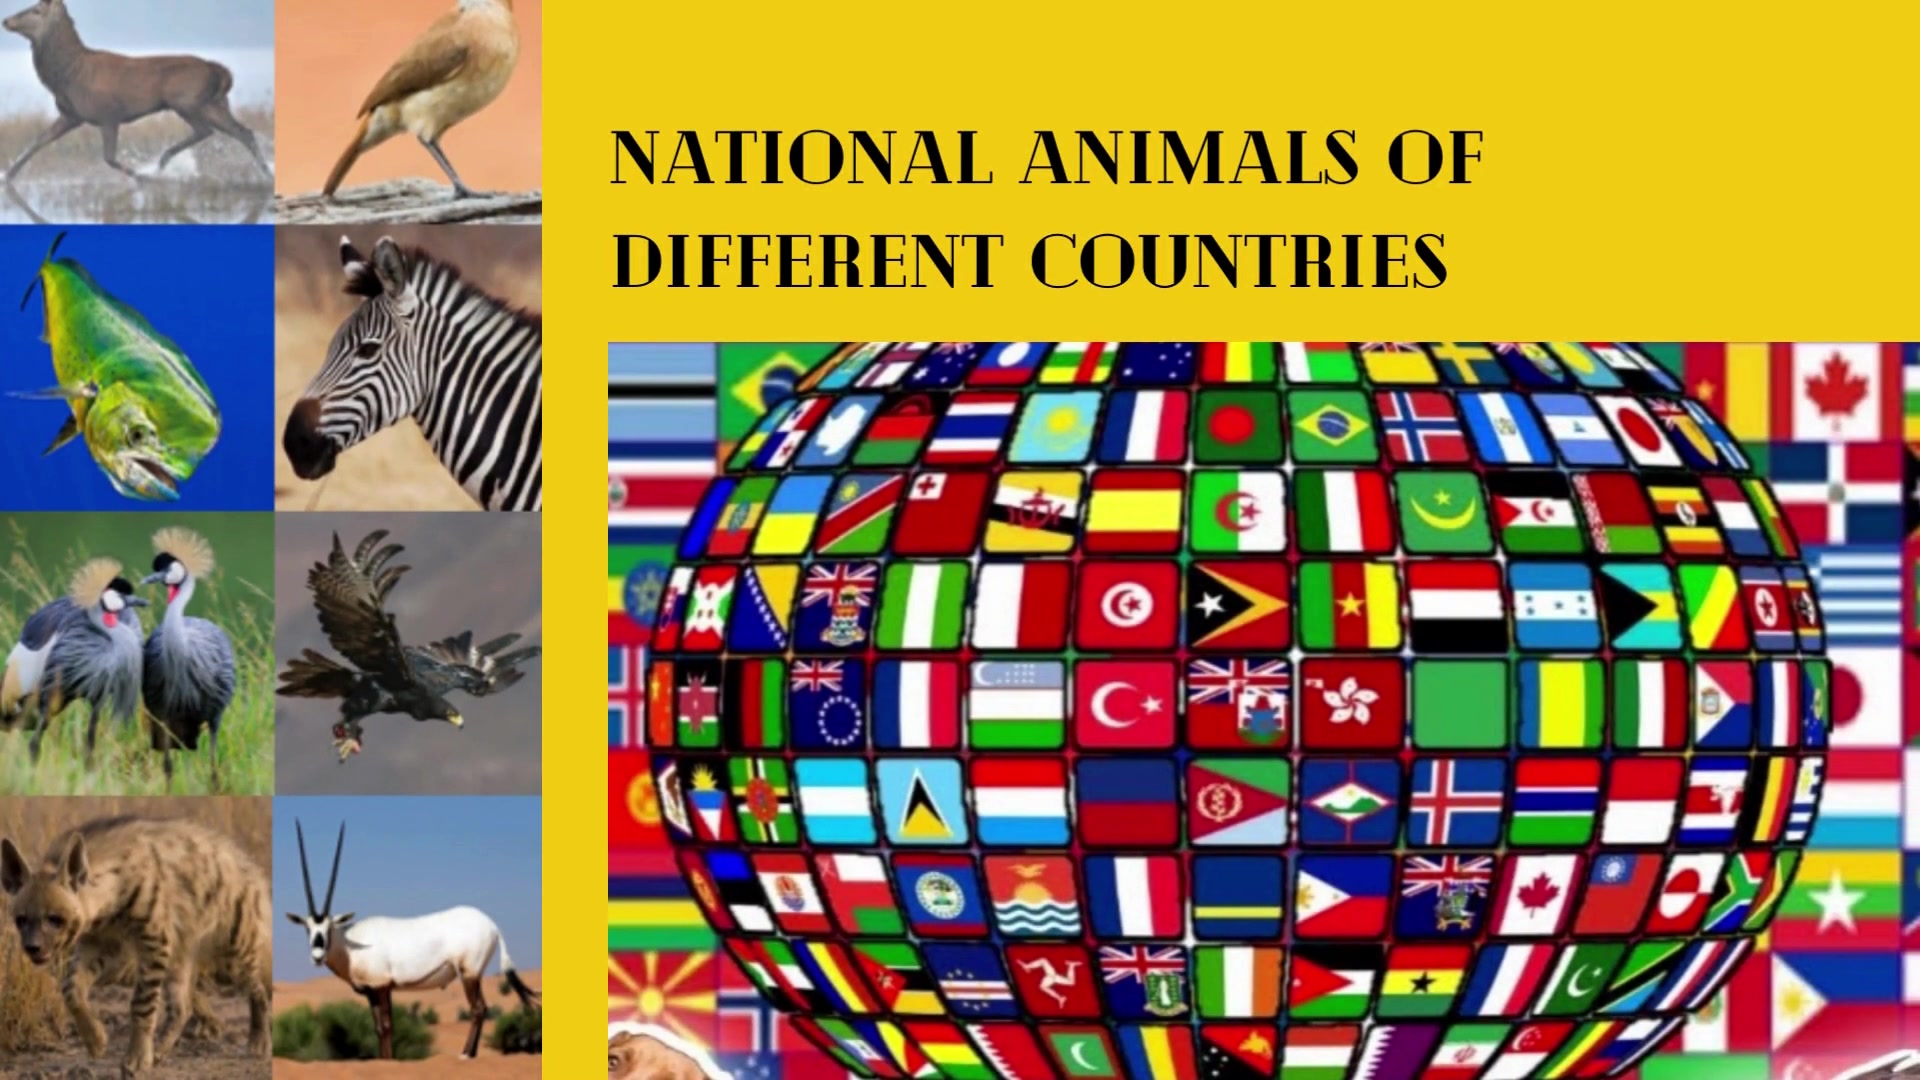 National animals of different Countries.